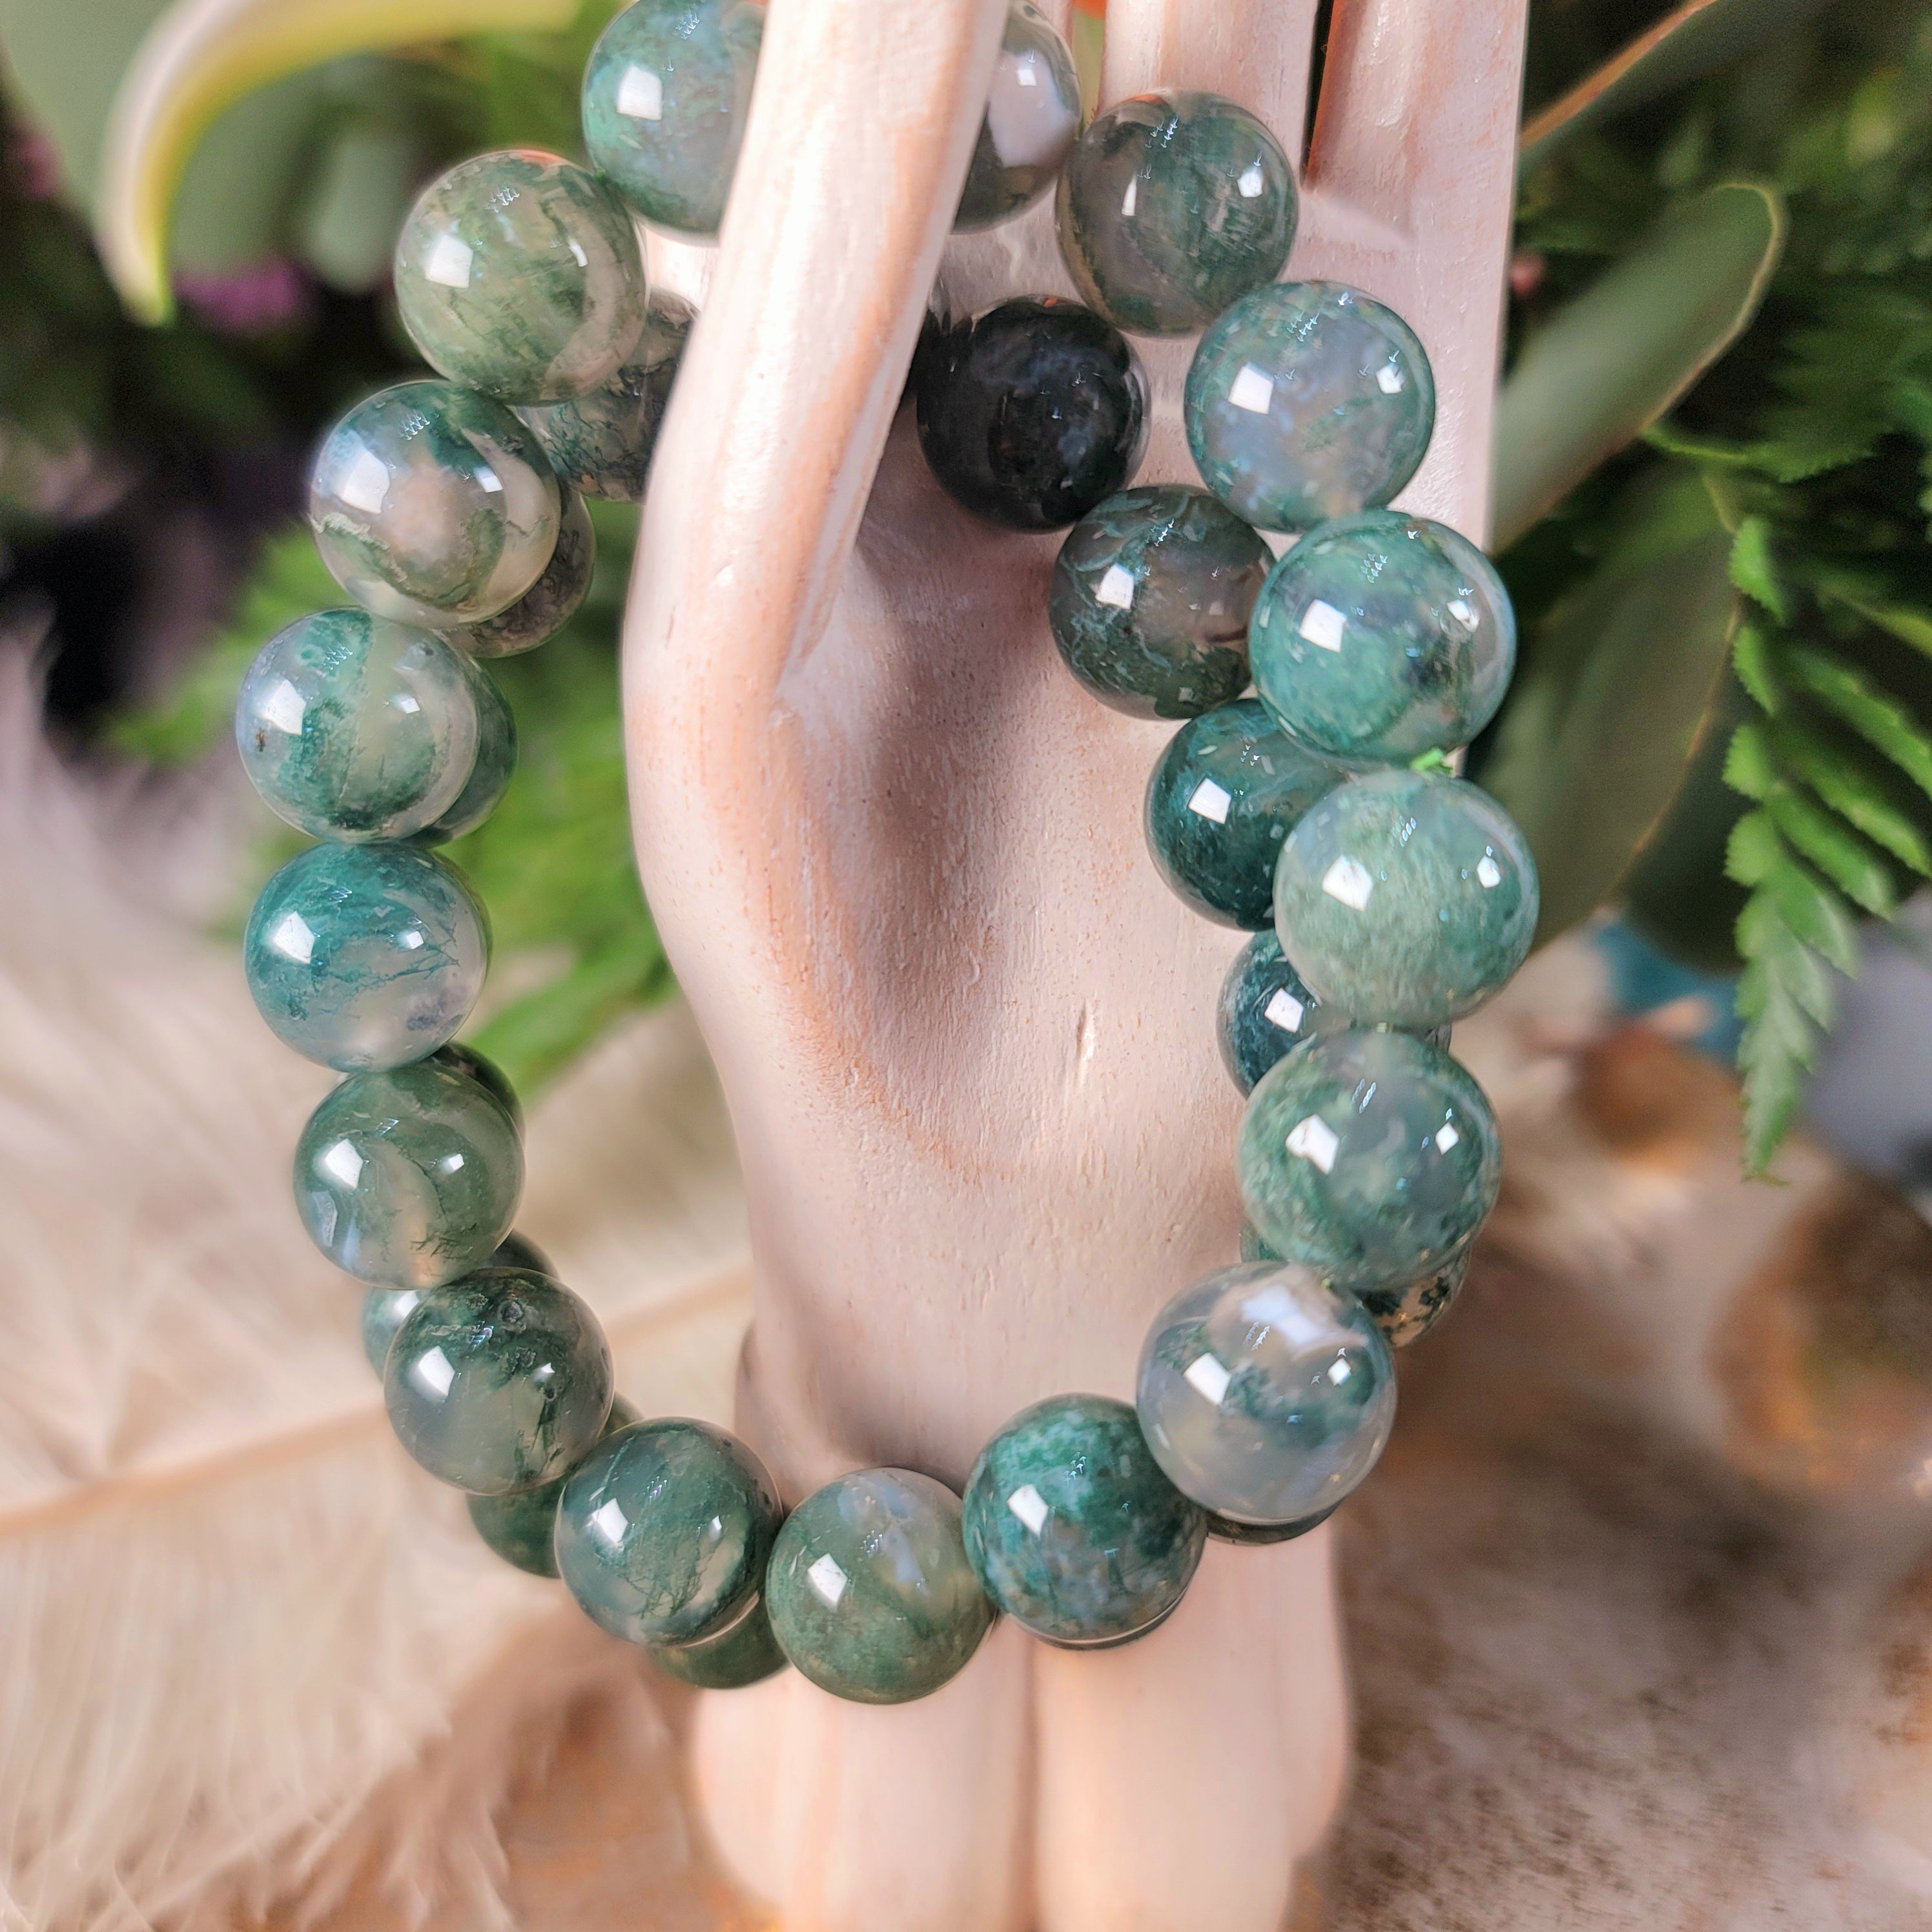 Moss Agate Bracelet for Bringing Your Dreams to Reality, Grounding and Healing